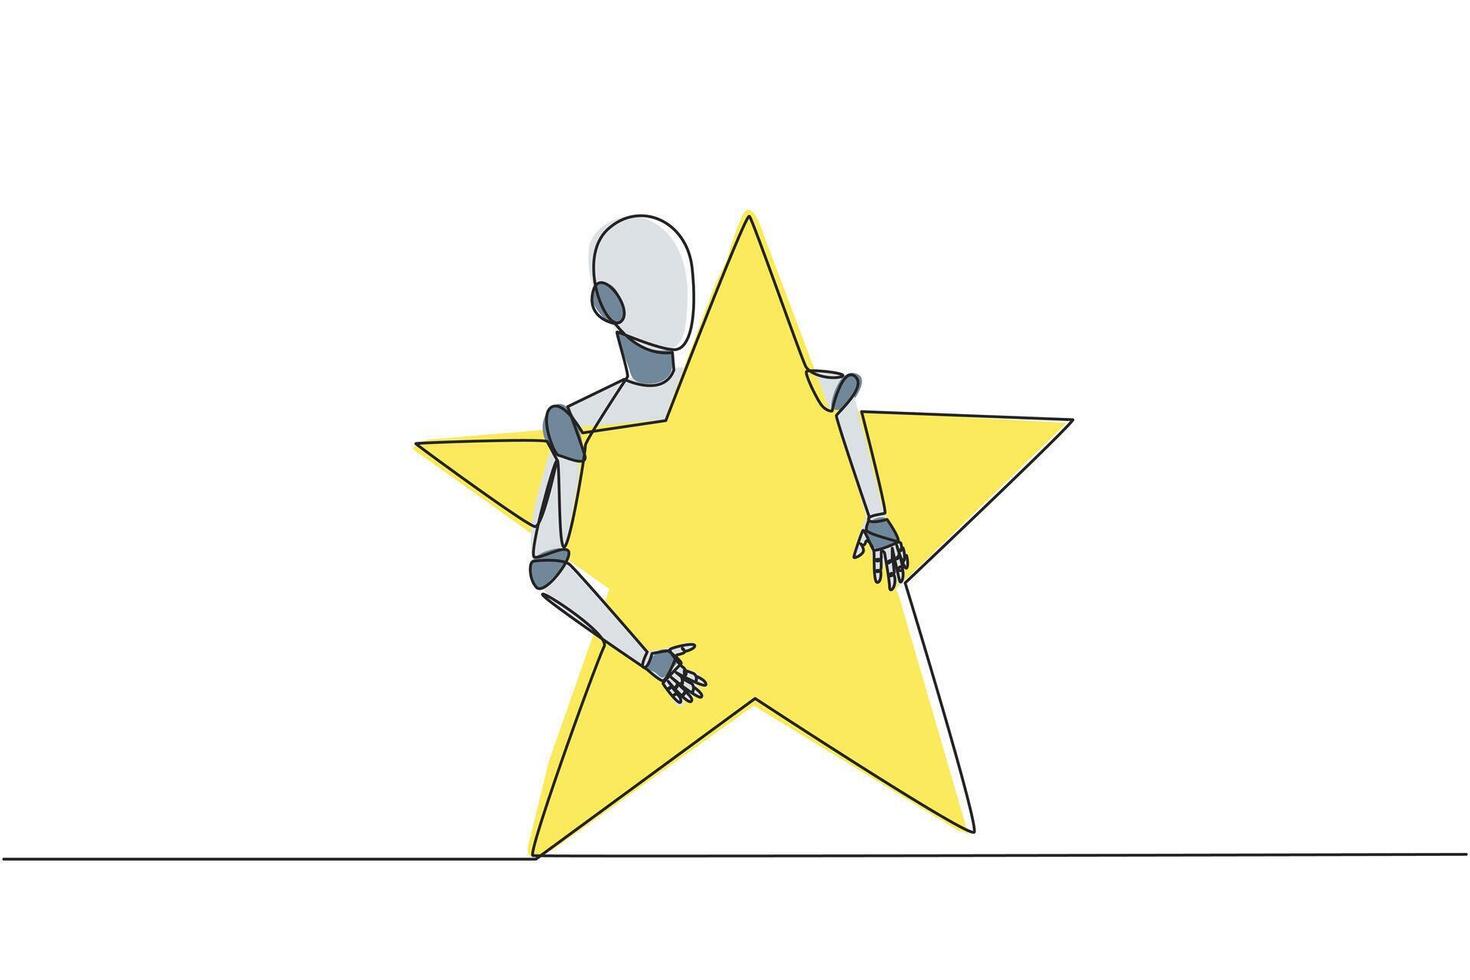 Single continuous line drawing robot hugging star. Like the sheriff, this robot technology also has star as a rank. Future technology development concept. AI tech. One line design vector illustration